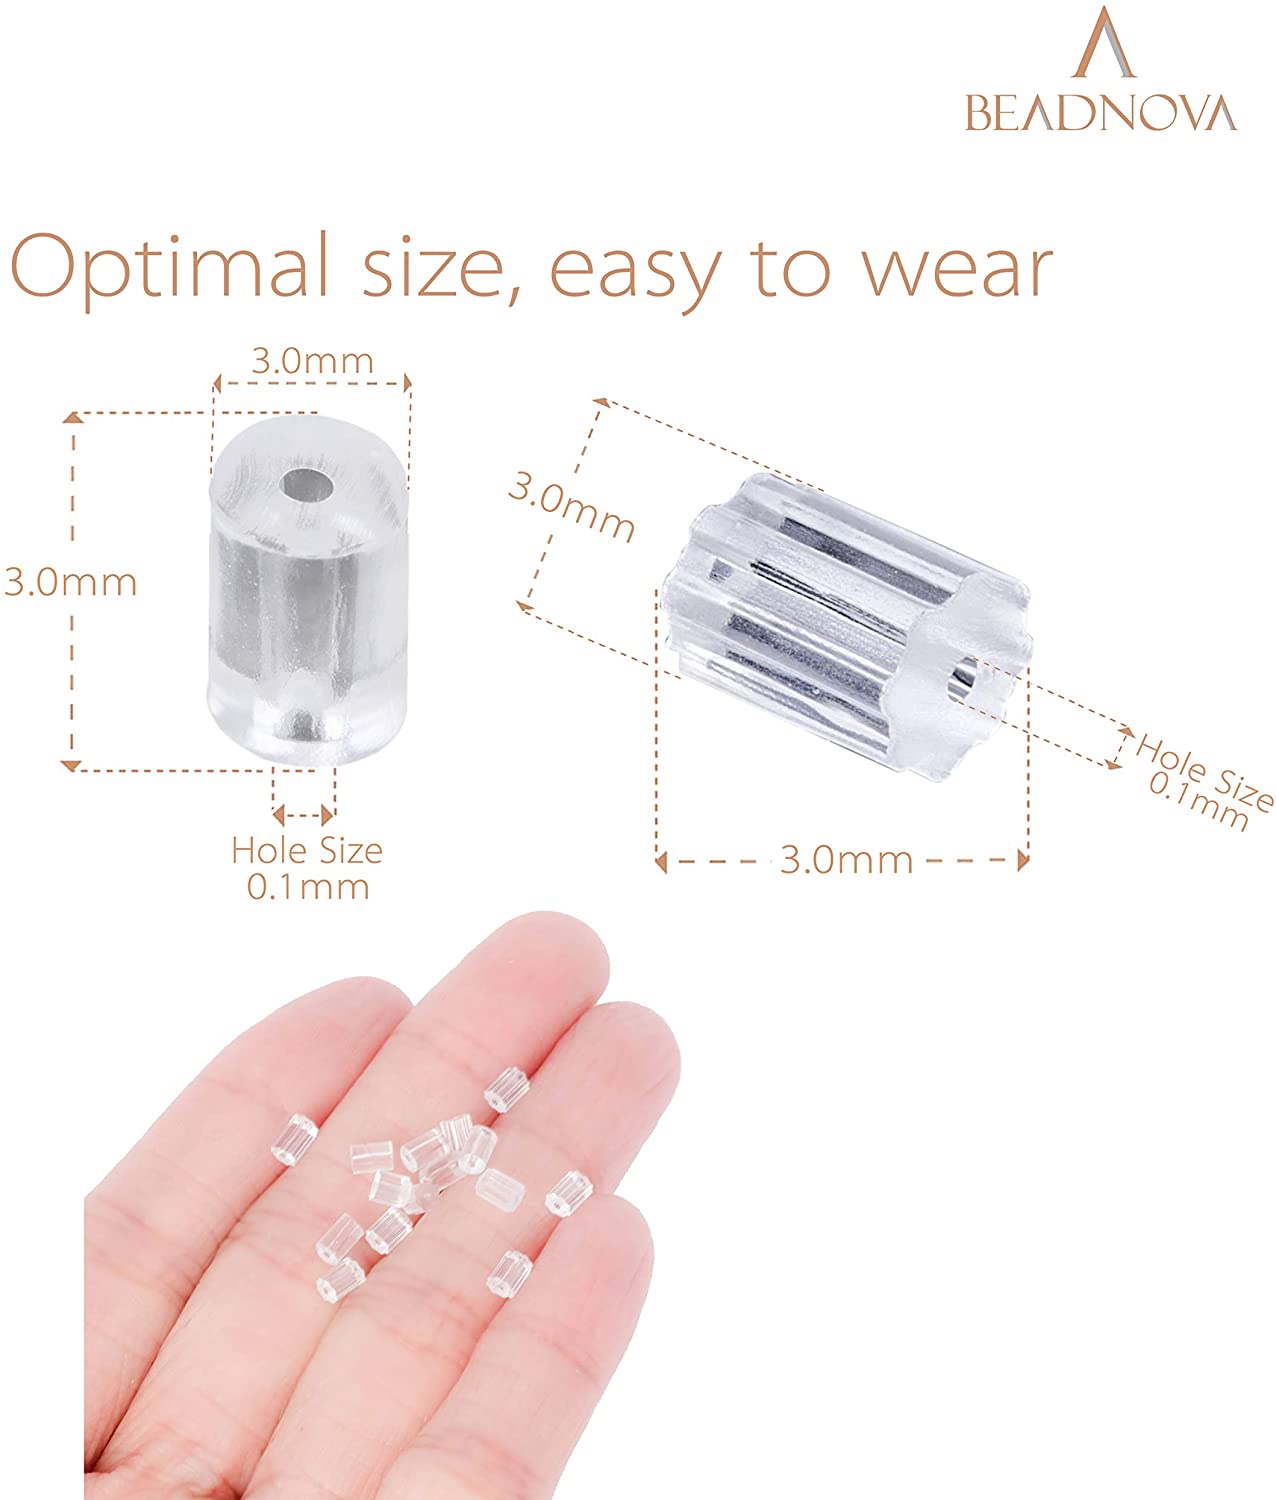 Nkwuire 4 Styles 620 Pcs Silicone Earring Backs For Studs, Clear Earring  Backings Hypoallergenic Plastic Rubber Earring Backs Bullet Clutch Stoppers  R